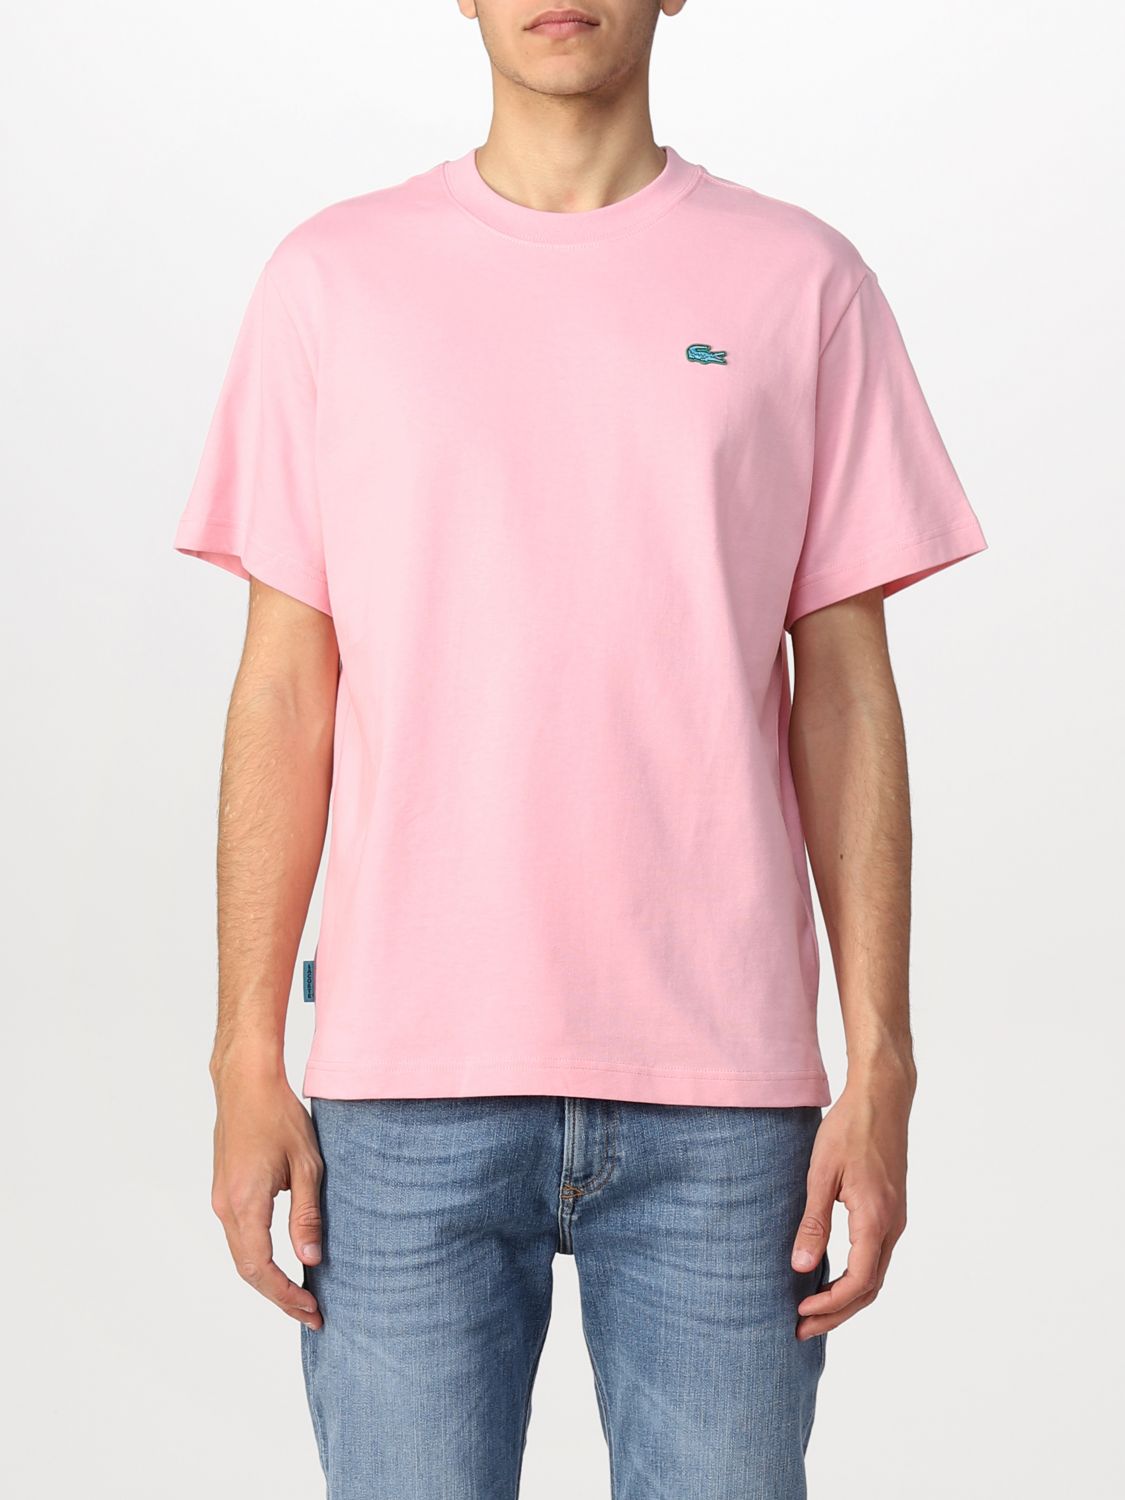 T-shirt Lacoste L!Ve: Lacoste L! Ve t-shirt in cotton with logo pink 1